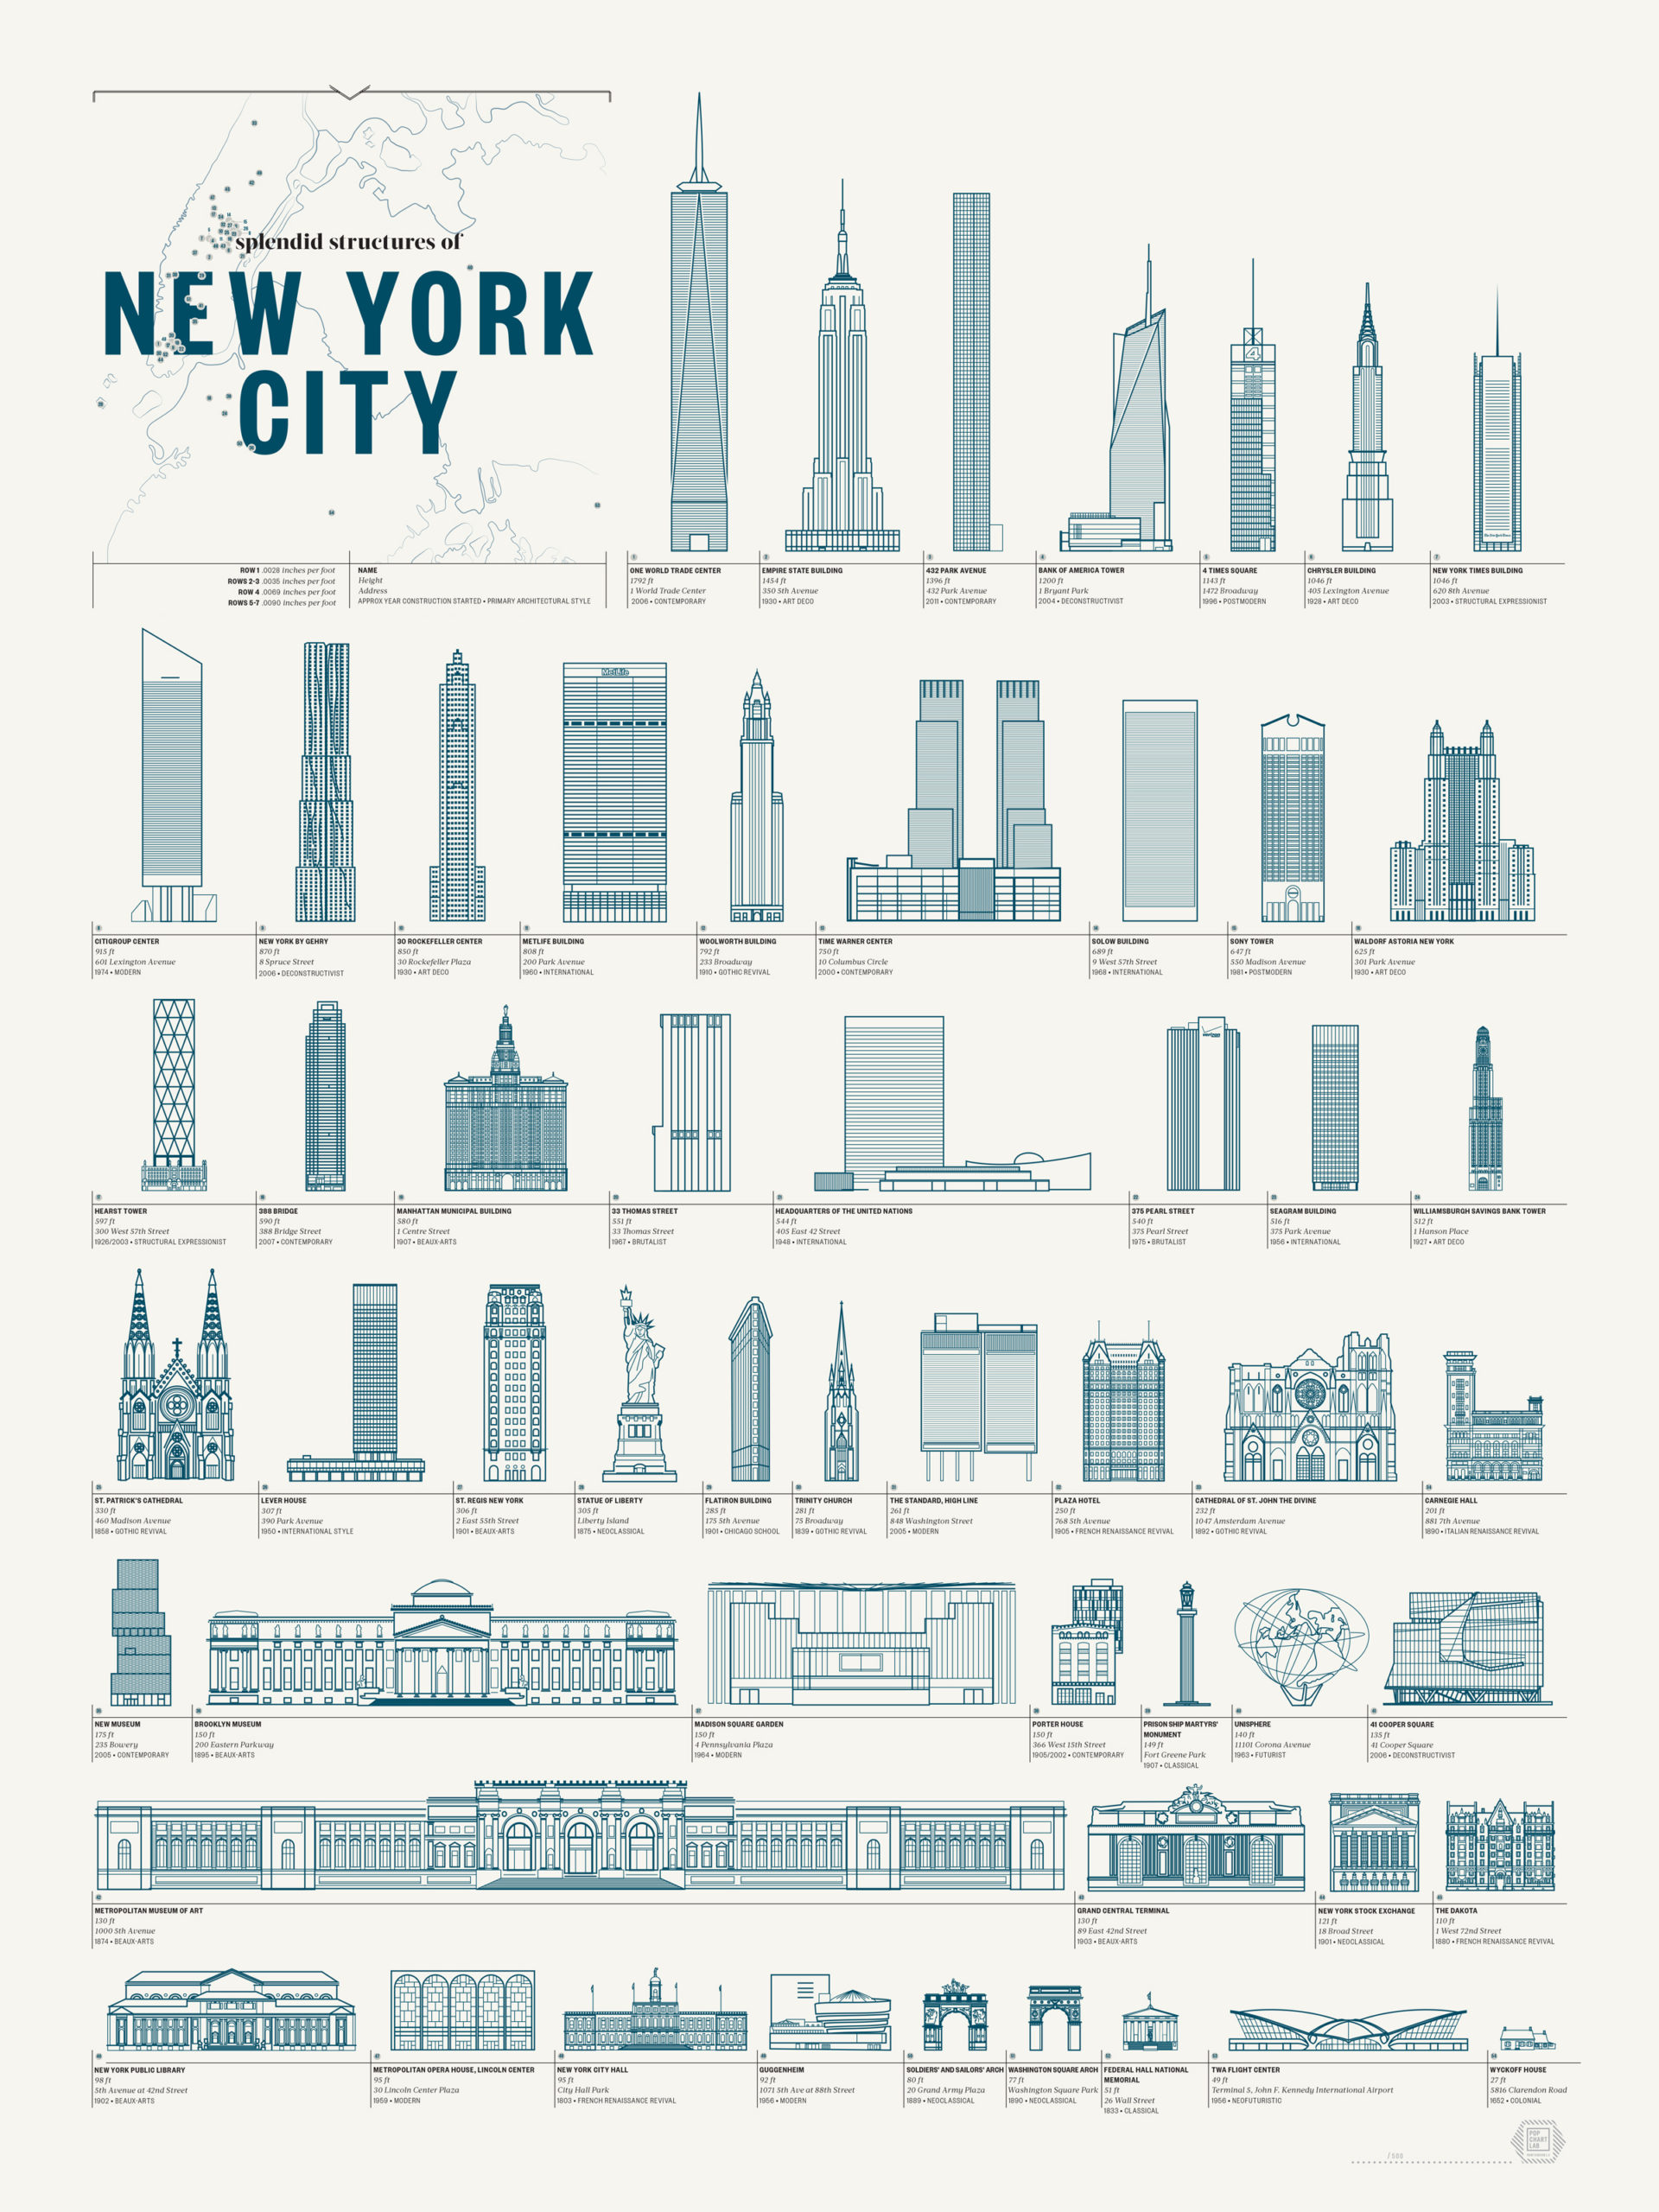 Take A Tour Of New York City’s Best Architecture In One Image